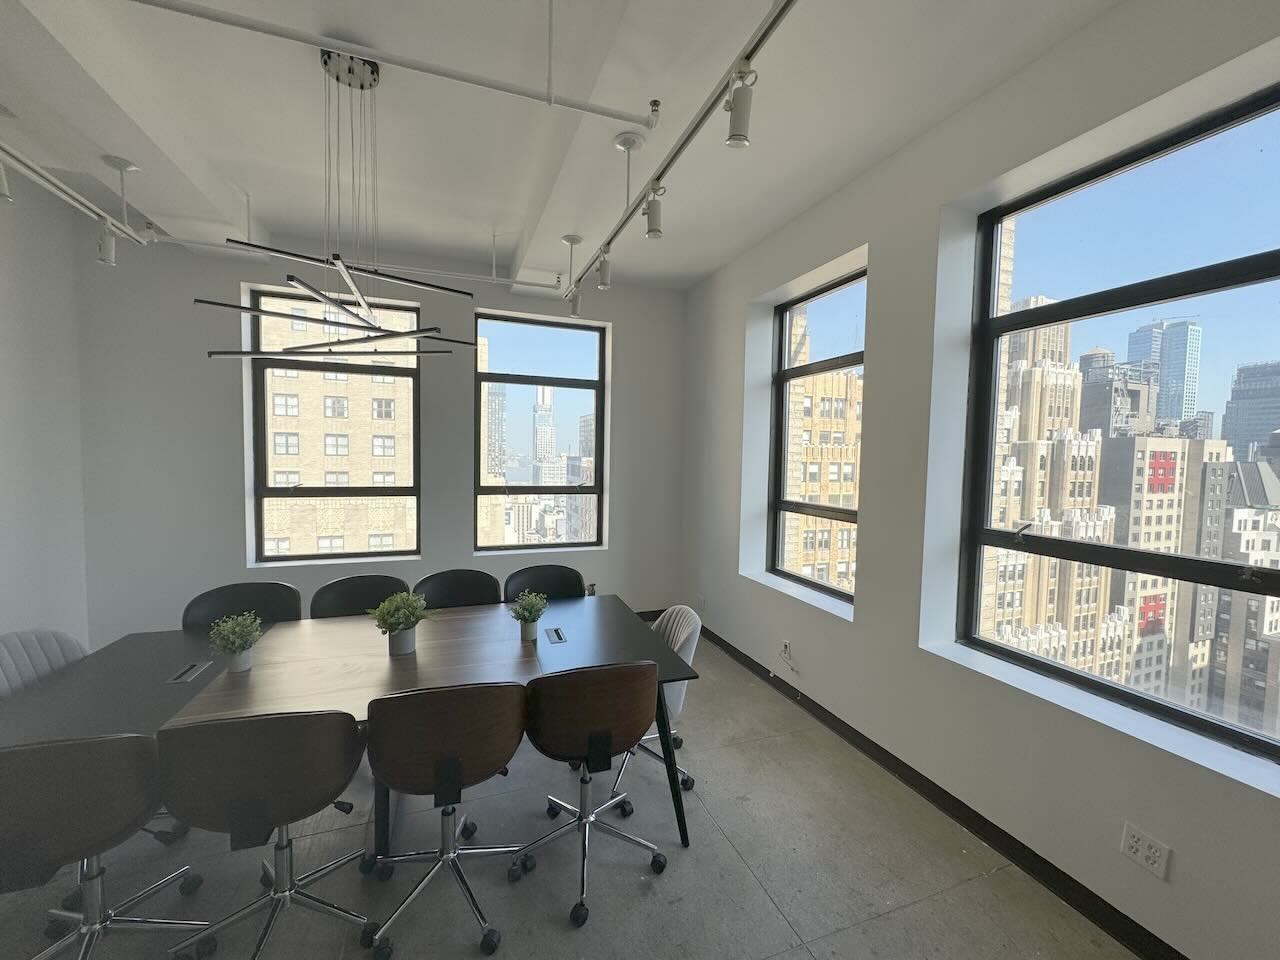 Full-Floor Class B Office Space for Lease at 494 Eighth Avenue, with views of Midtown Manhattan.